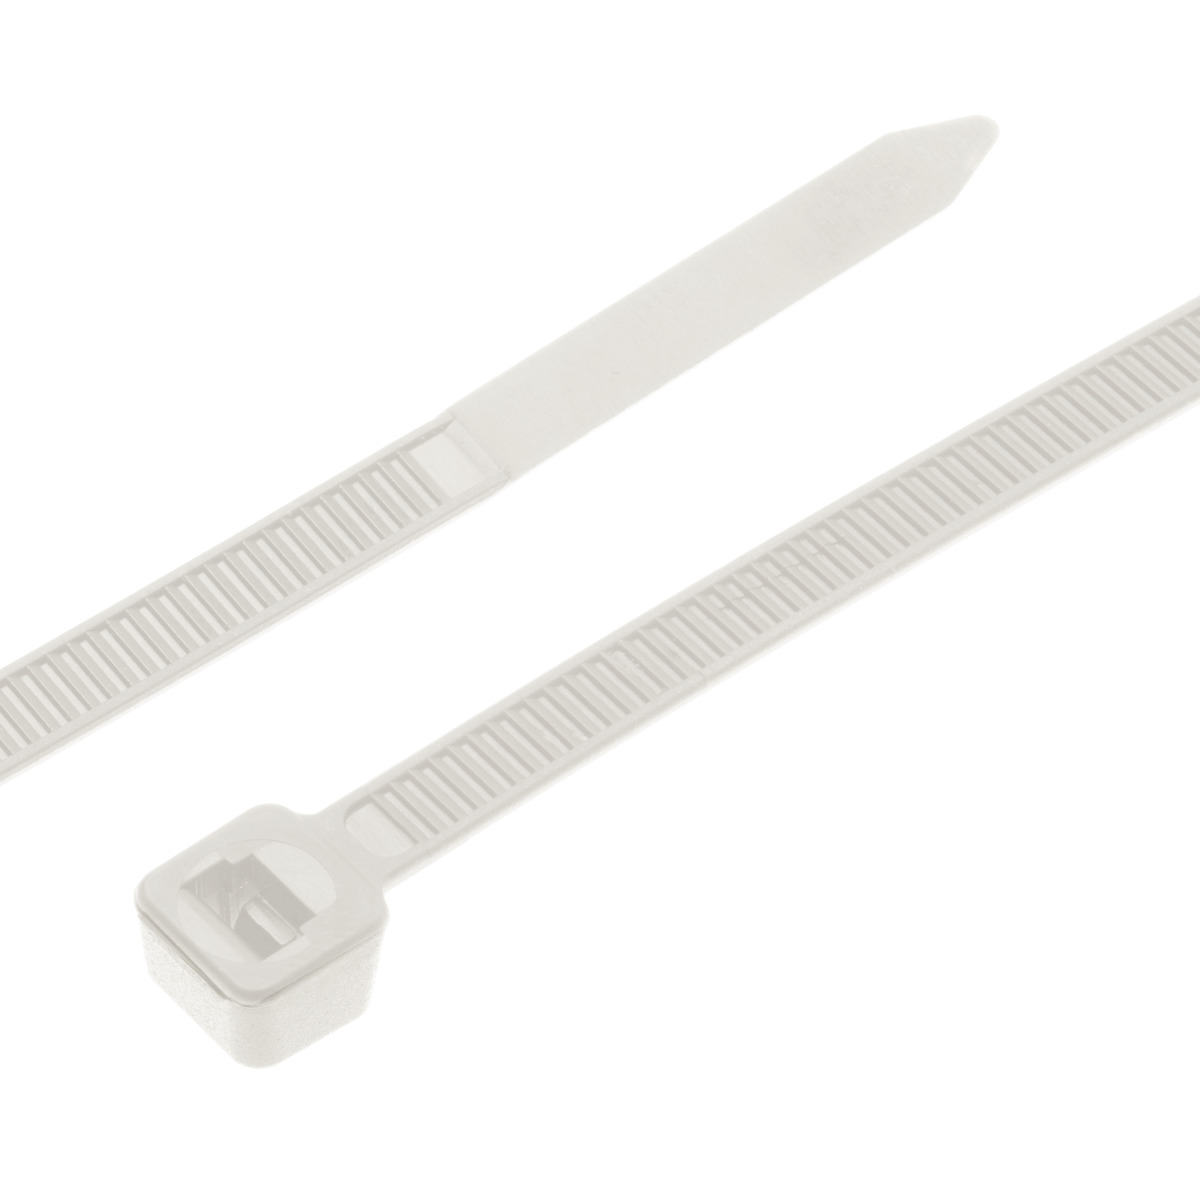 30”, Natural Super Heavy-Duty 175lb Cable Ties, 50 Pack - NSI Industries